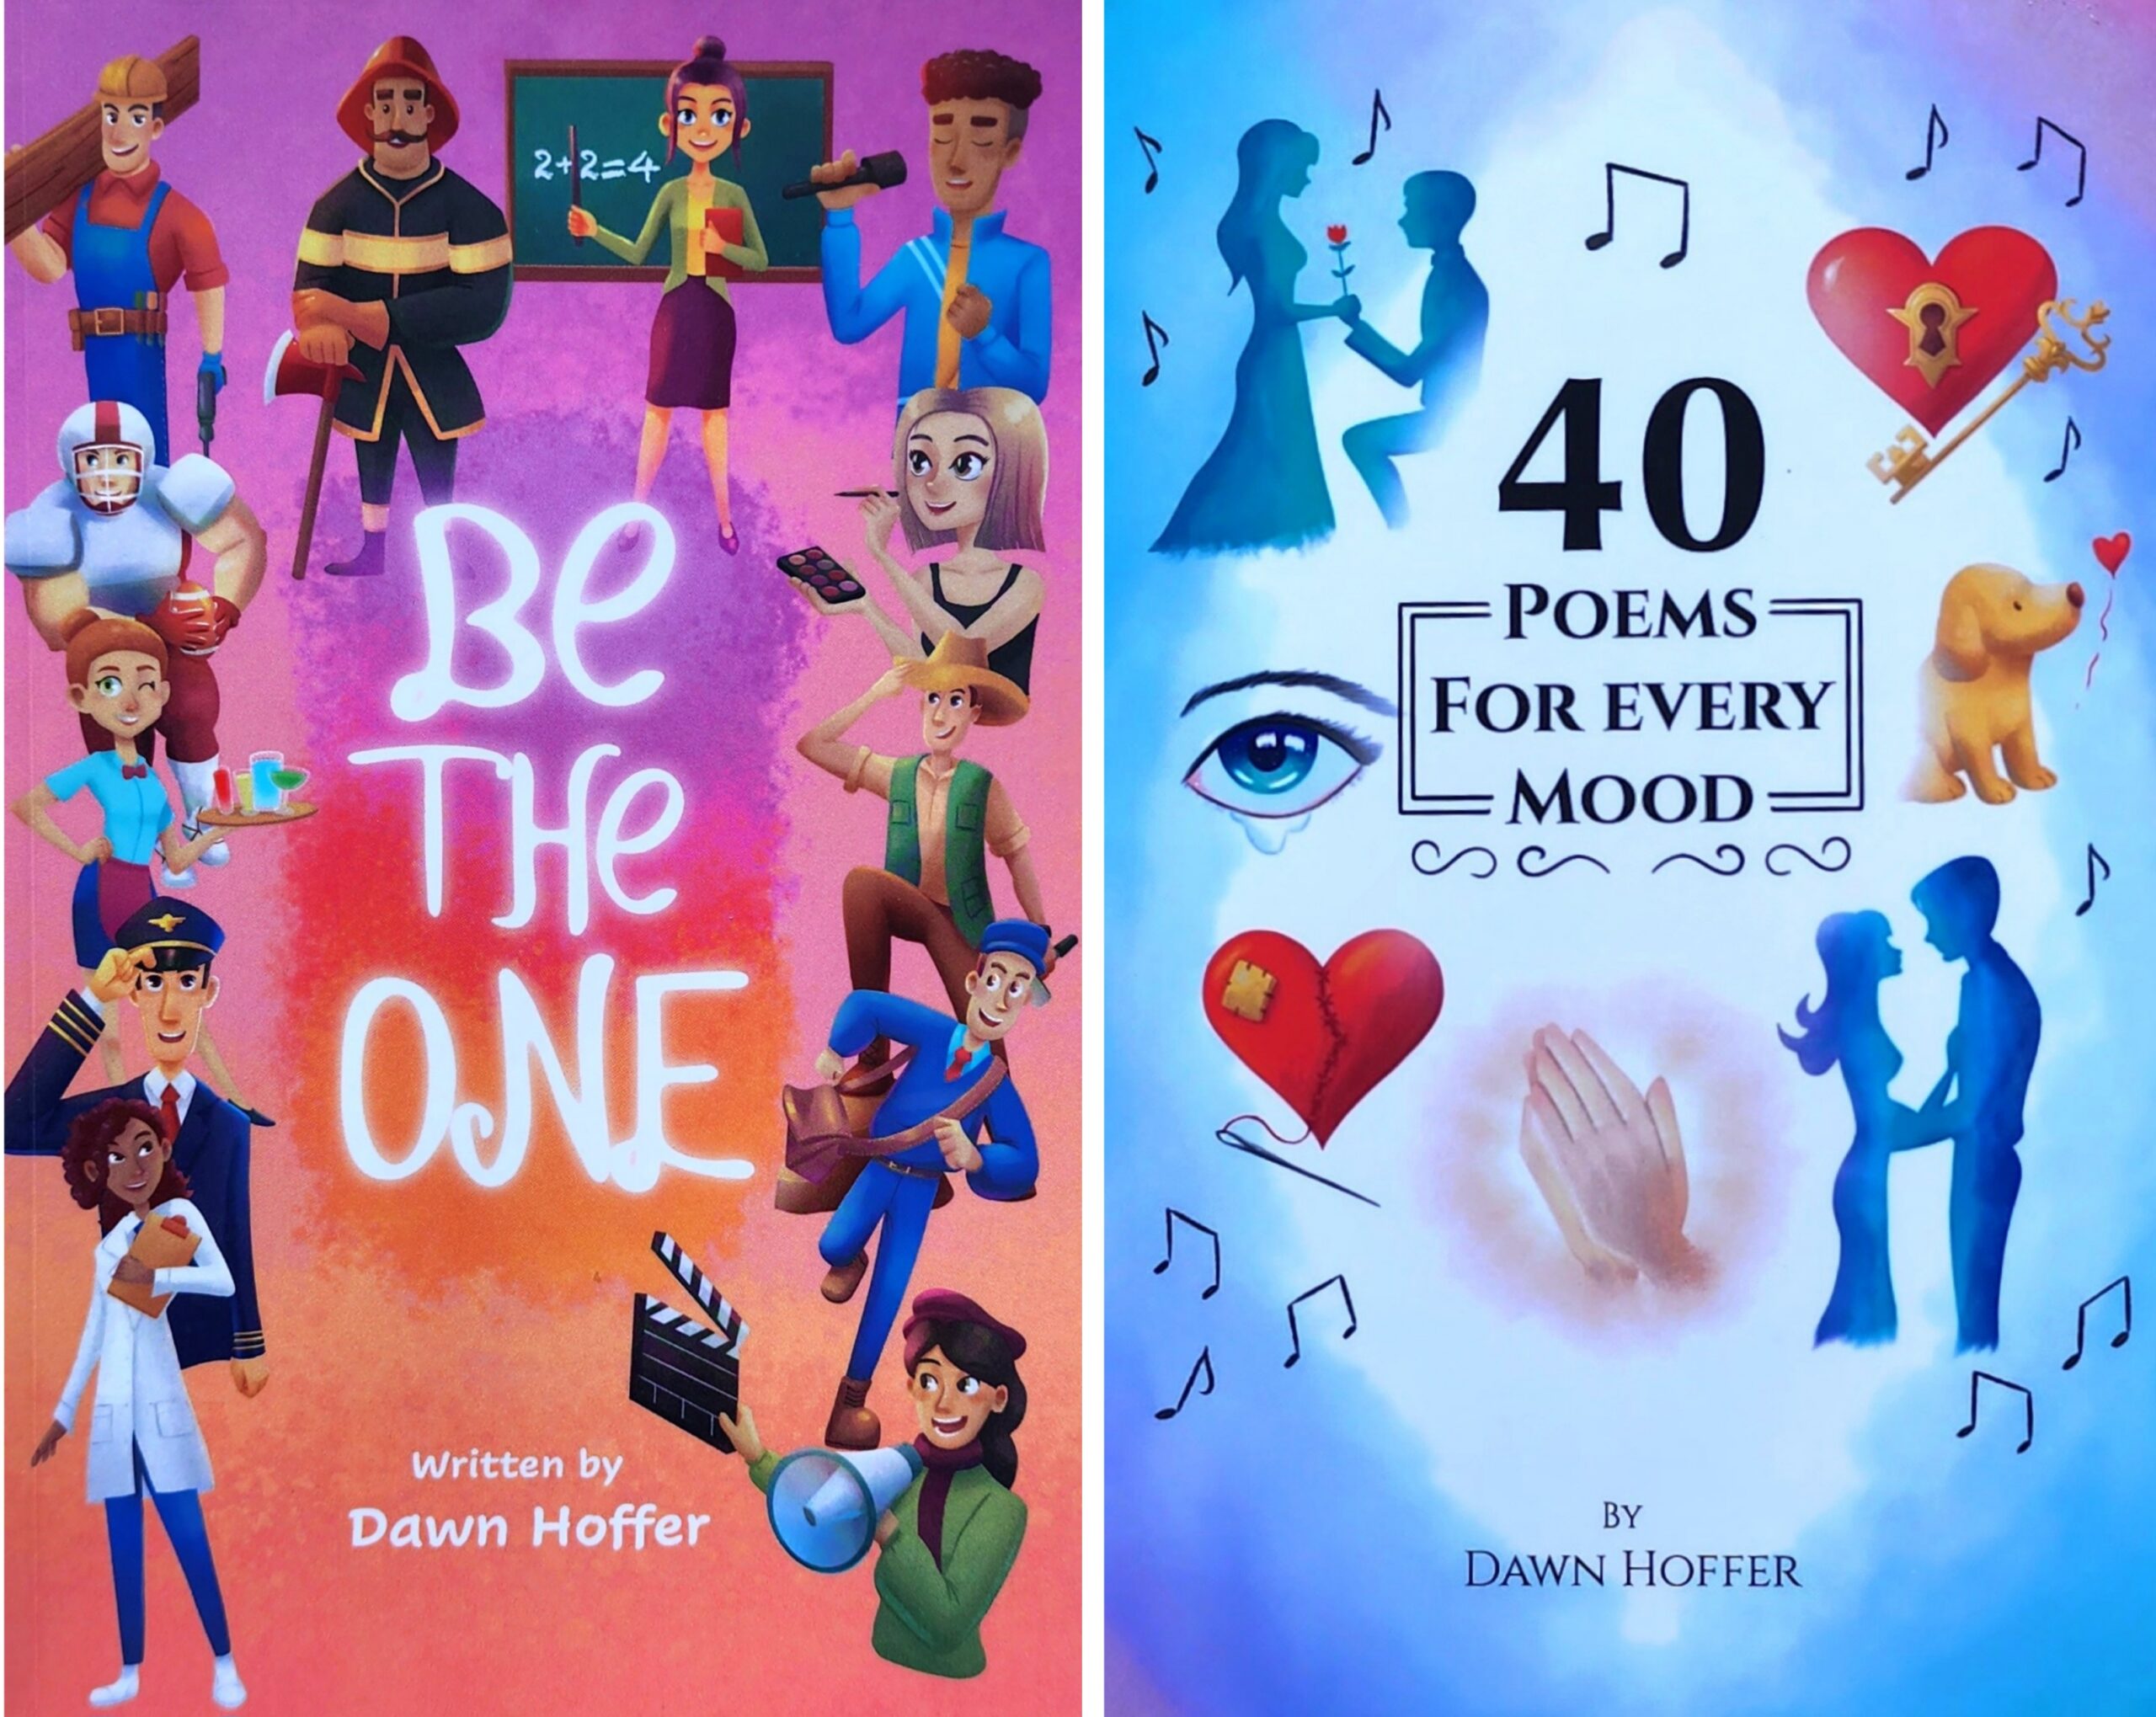 Be the One and 40 Poems for Every Mood by Dawn Hoffer